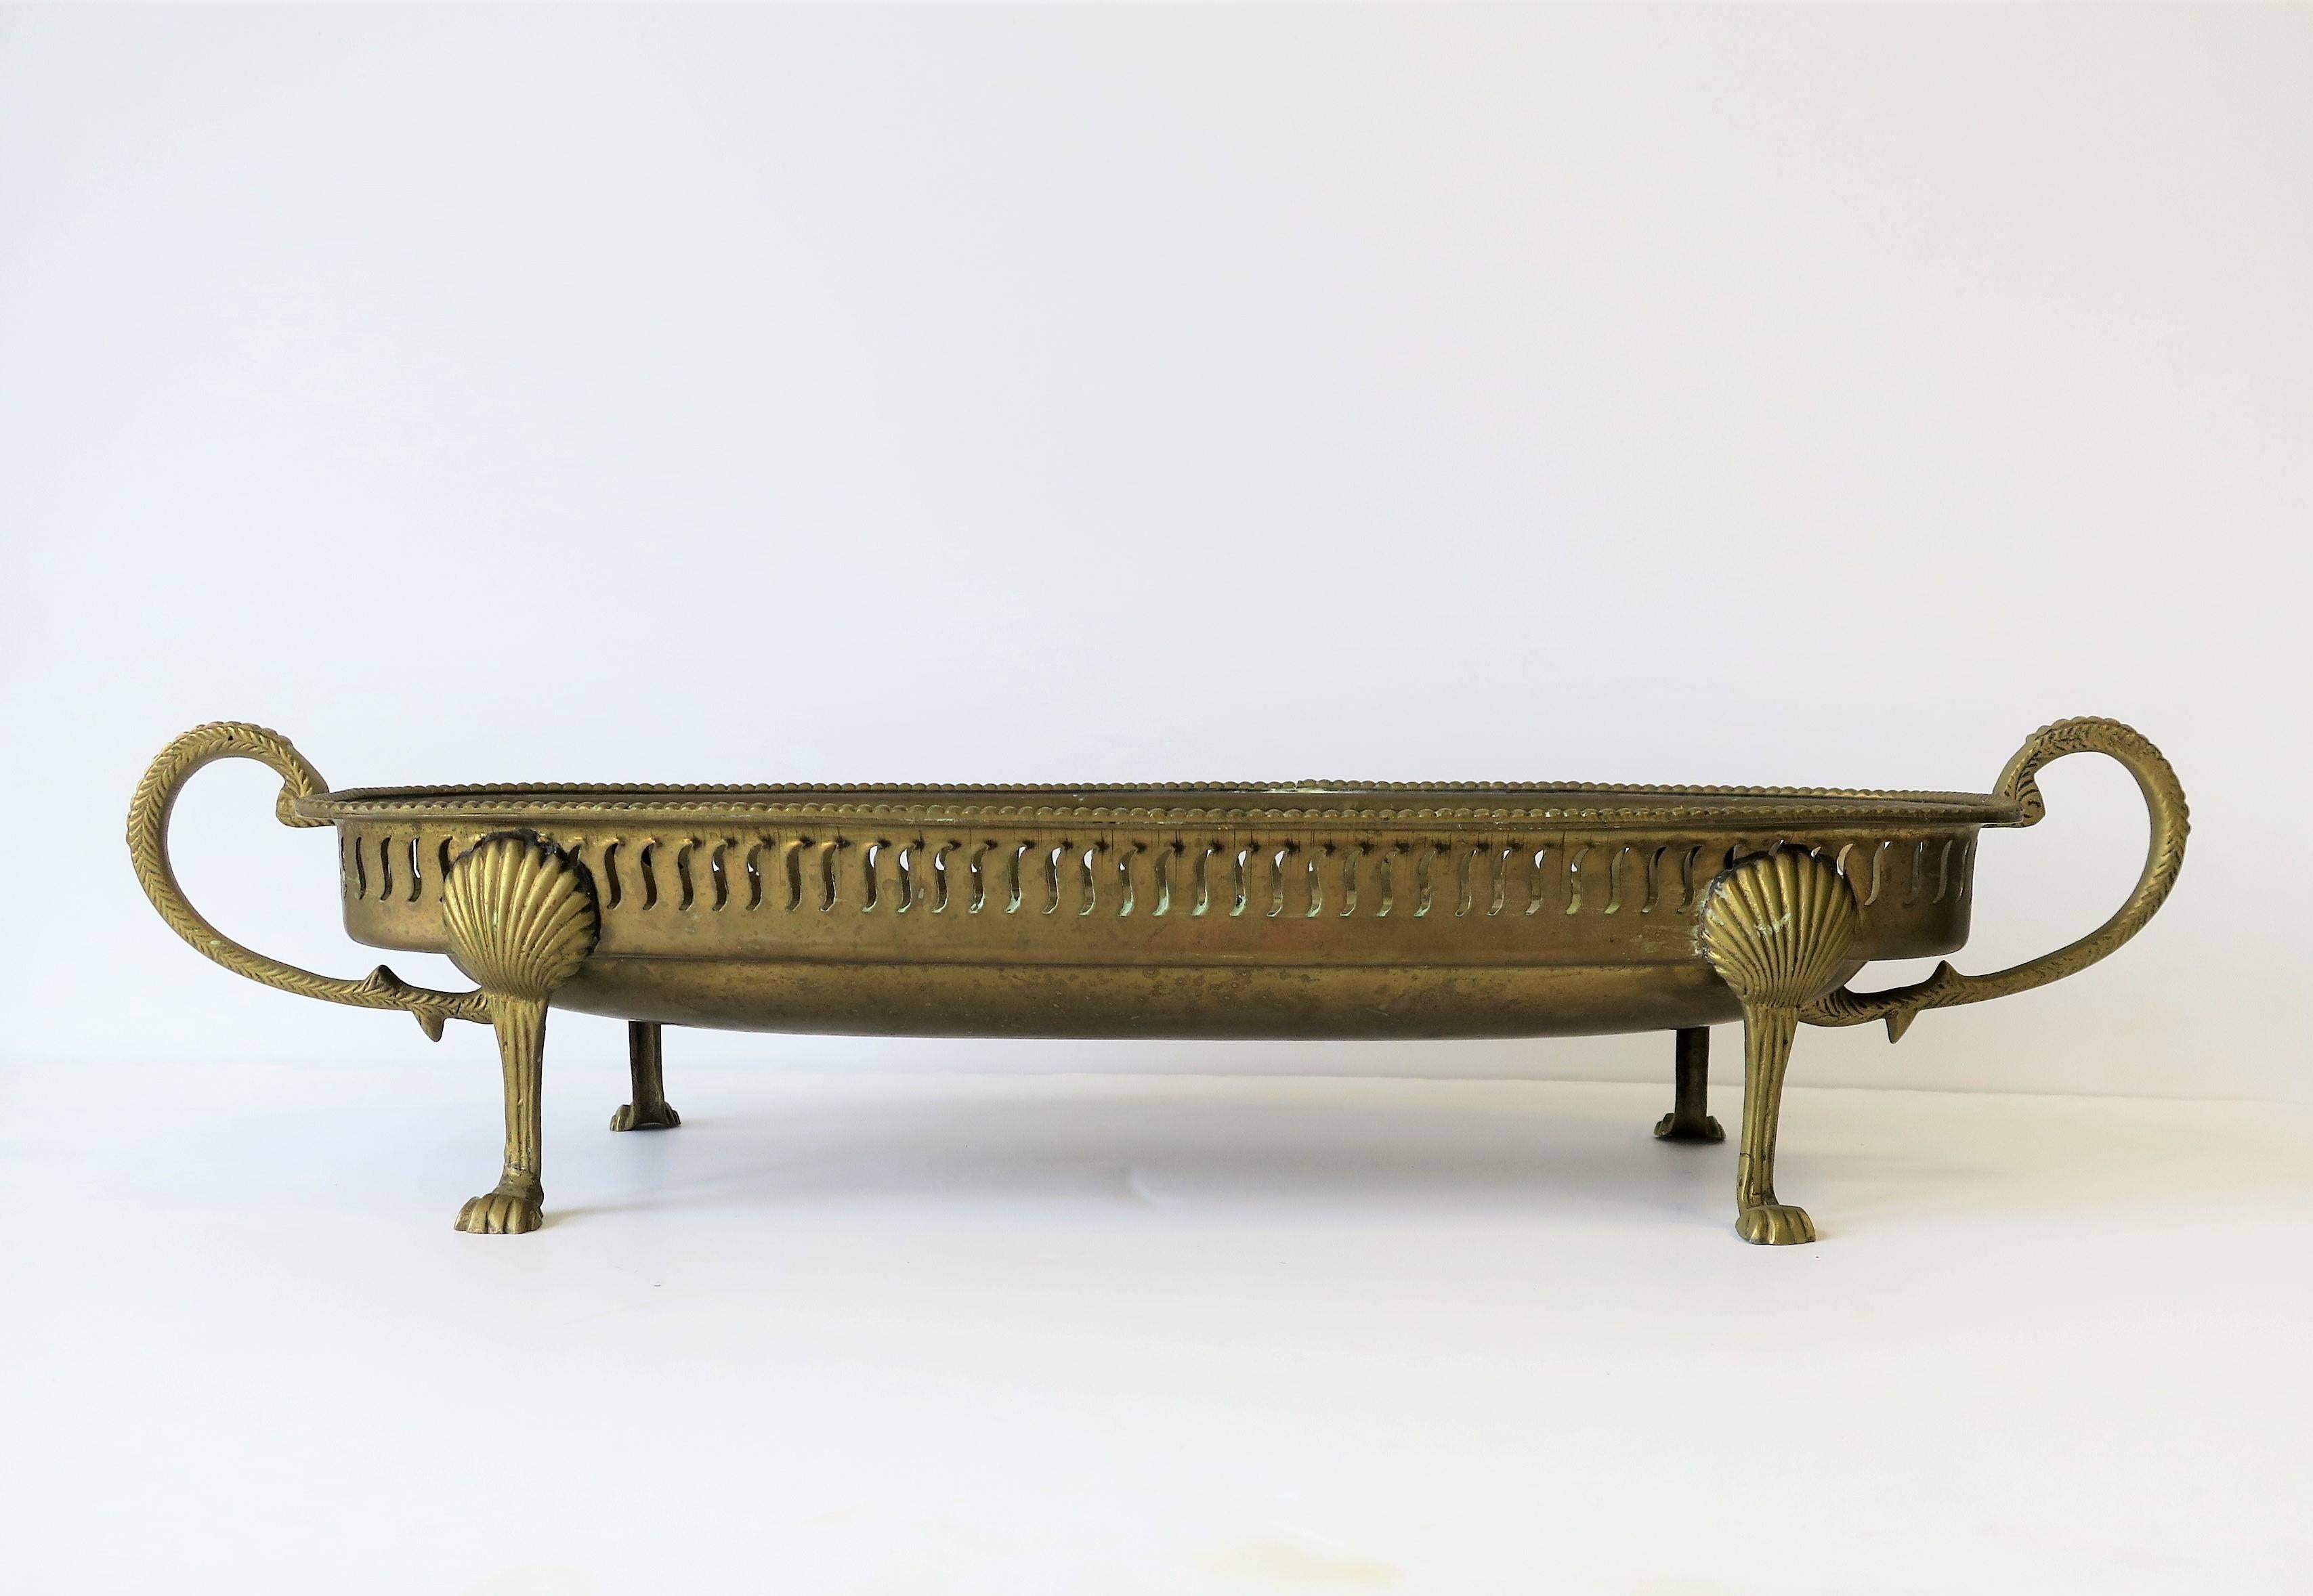 A beautiful brass footed oblong centerpiece, or vide-poche (catch-all) vessel, circa early 20th Century. Legs have oyster shell and paw feet detail in the Regency style. 

Measures: 7 in. D x 20 in. W x 4 in. H

Medium sized seashell featured in